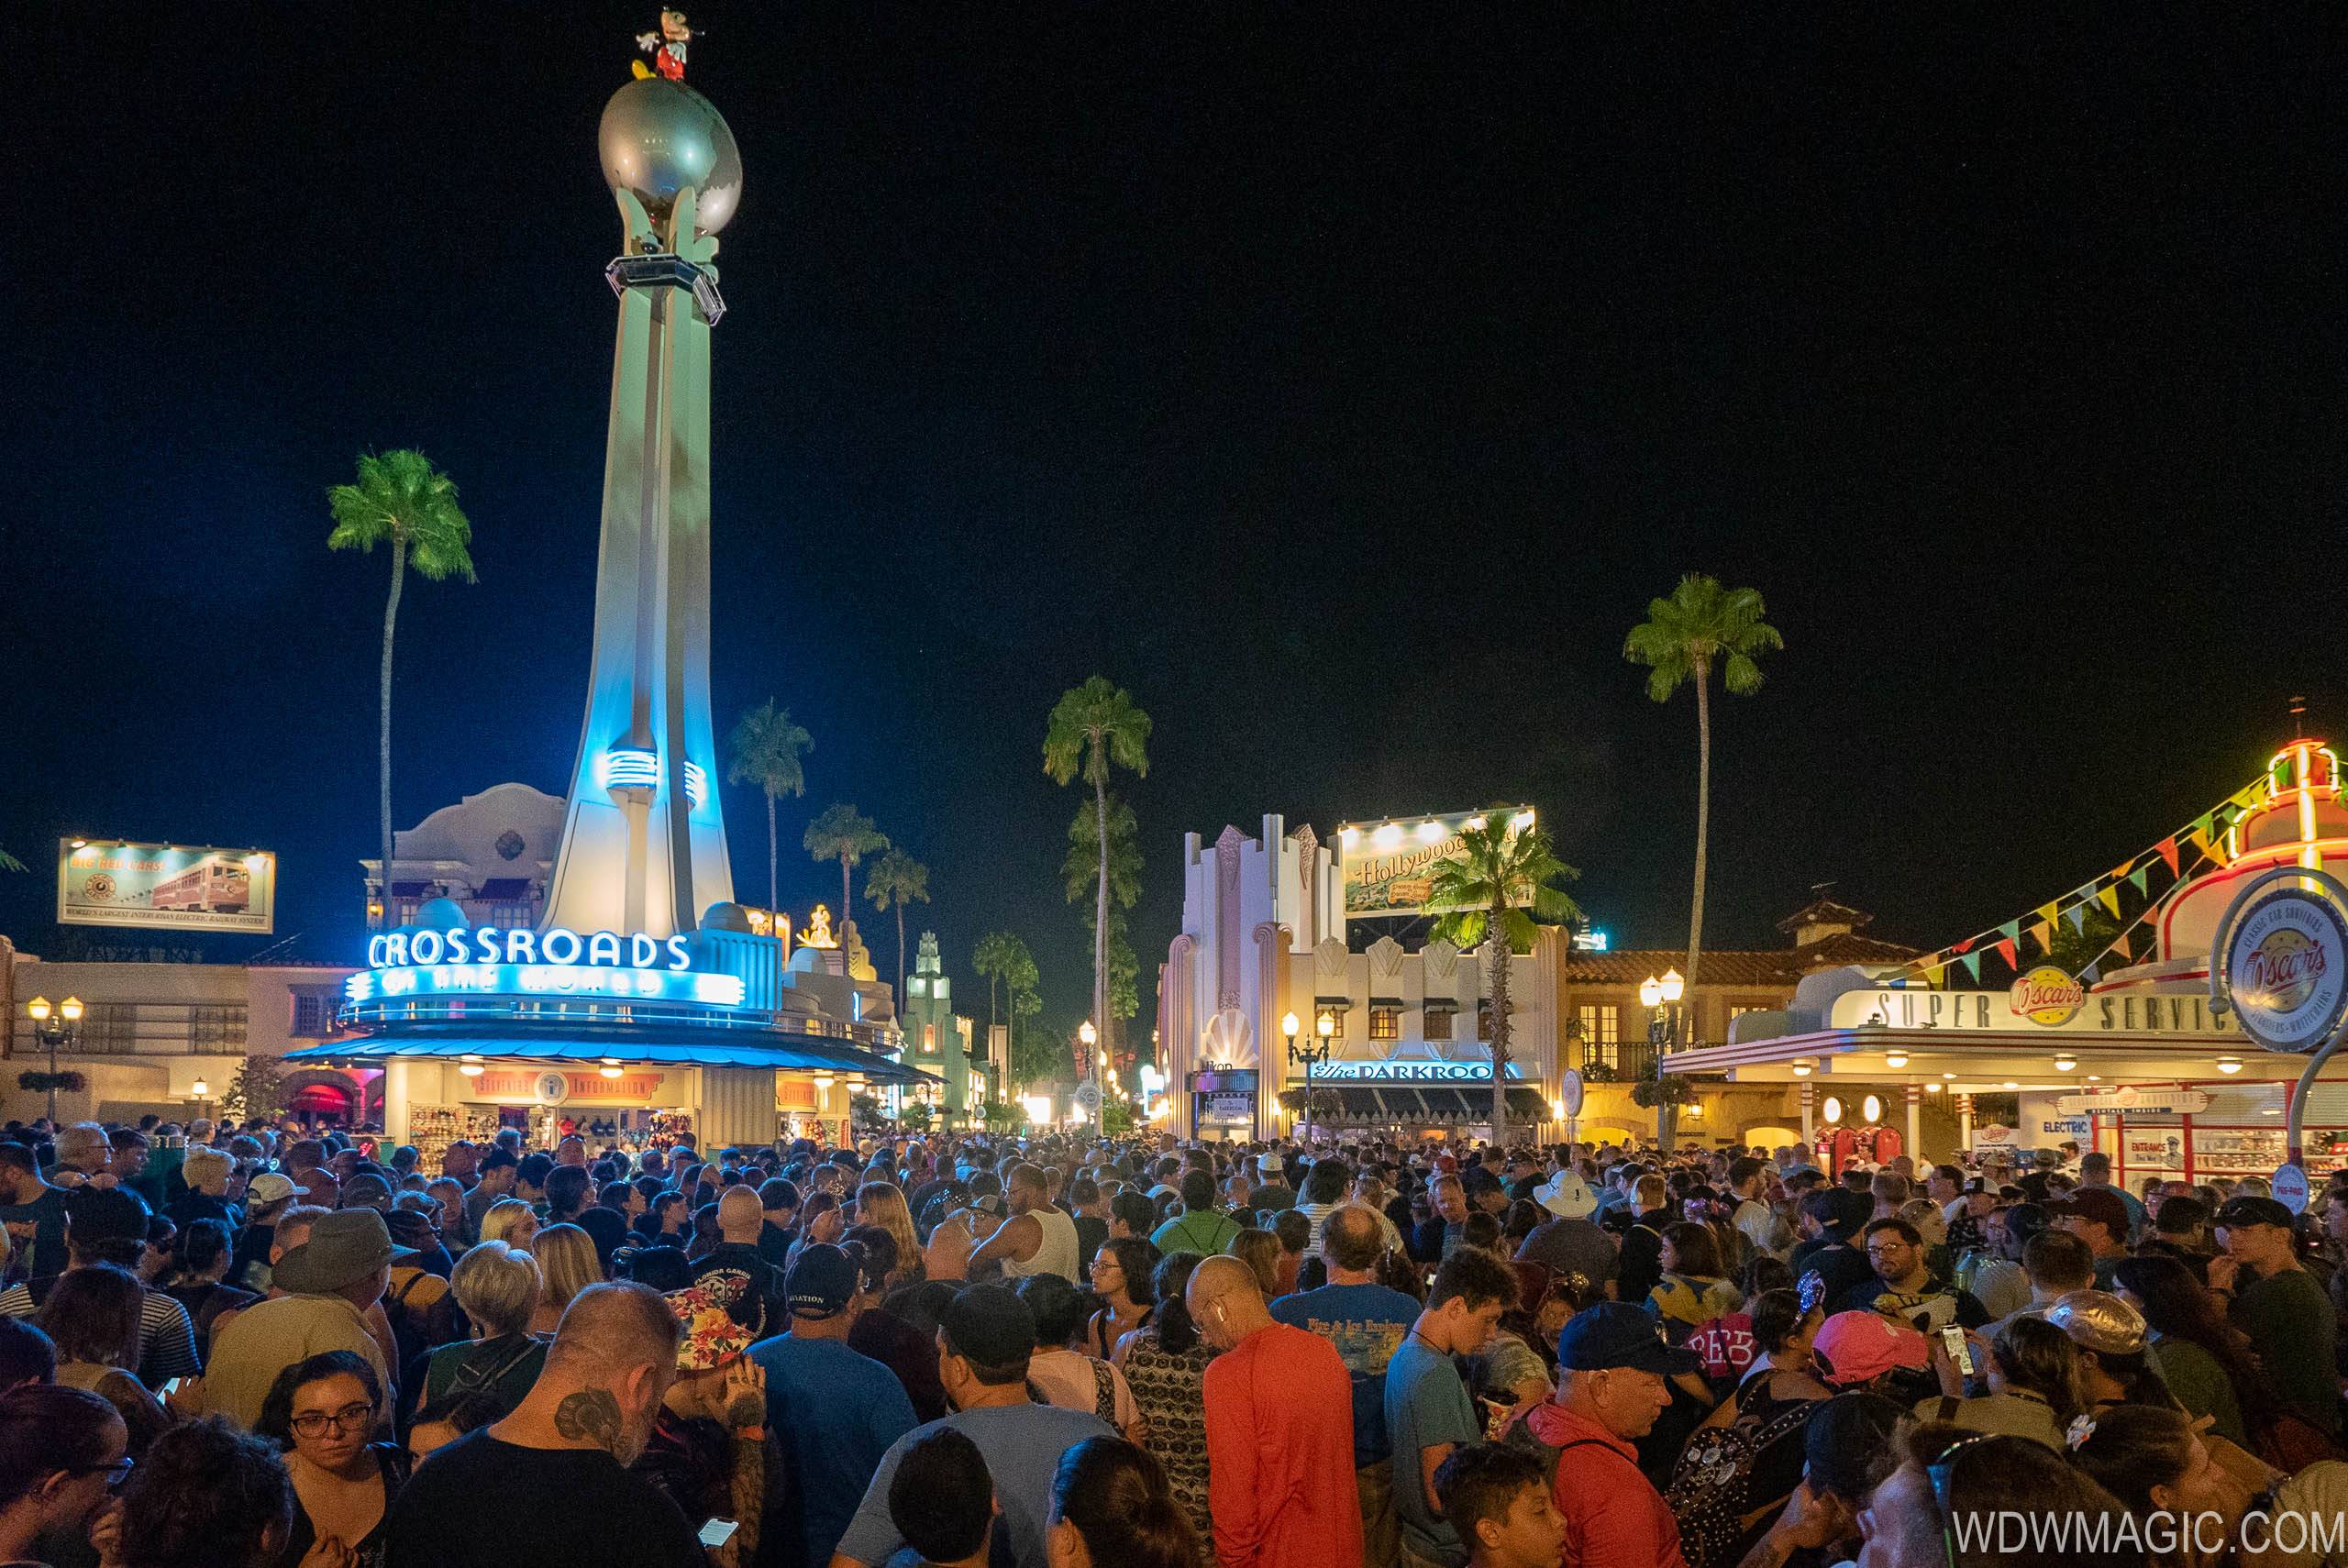 HUge crowds descended on Disney's Hollywood Studios for Star Wars Galaxy's Edge